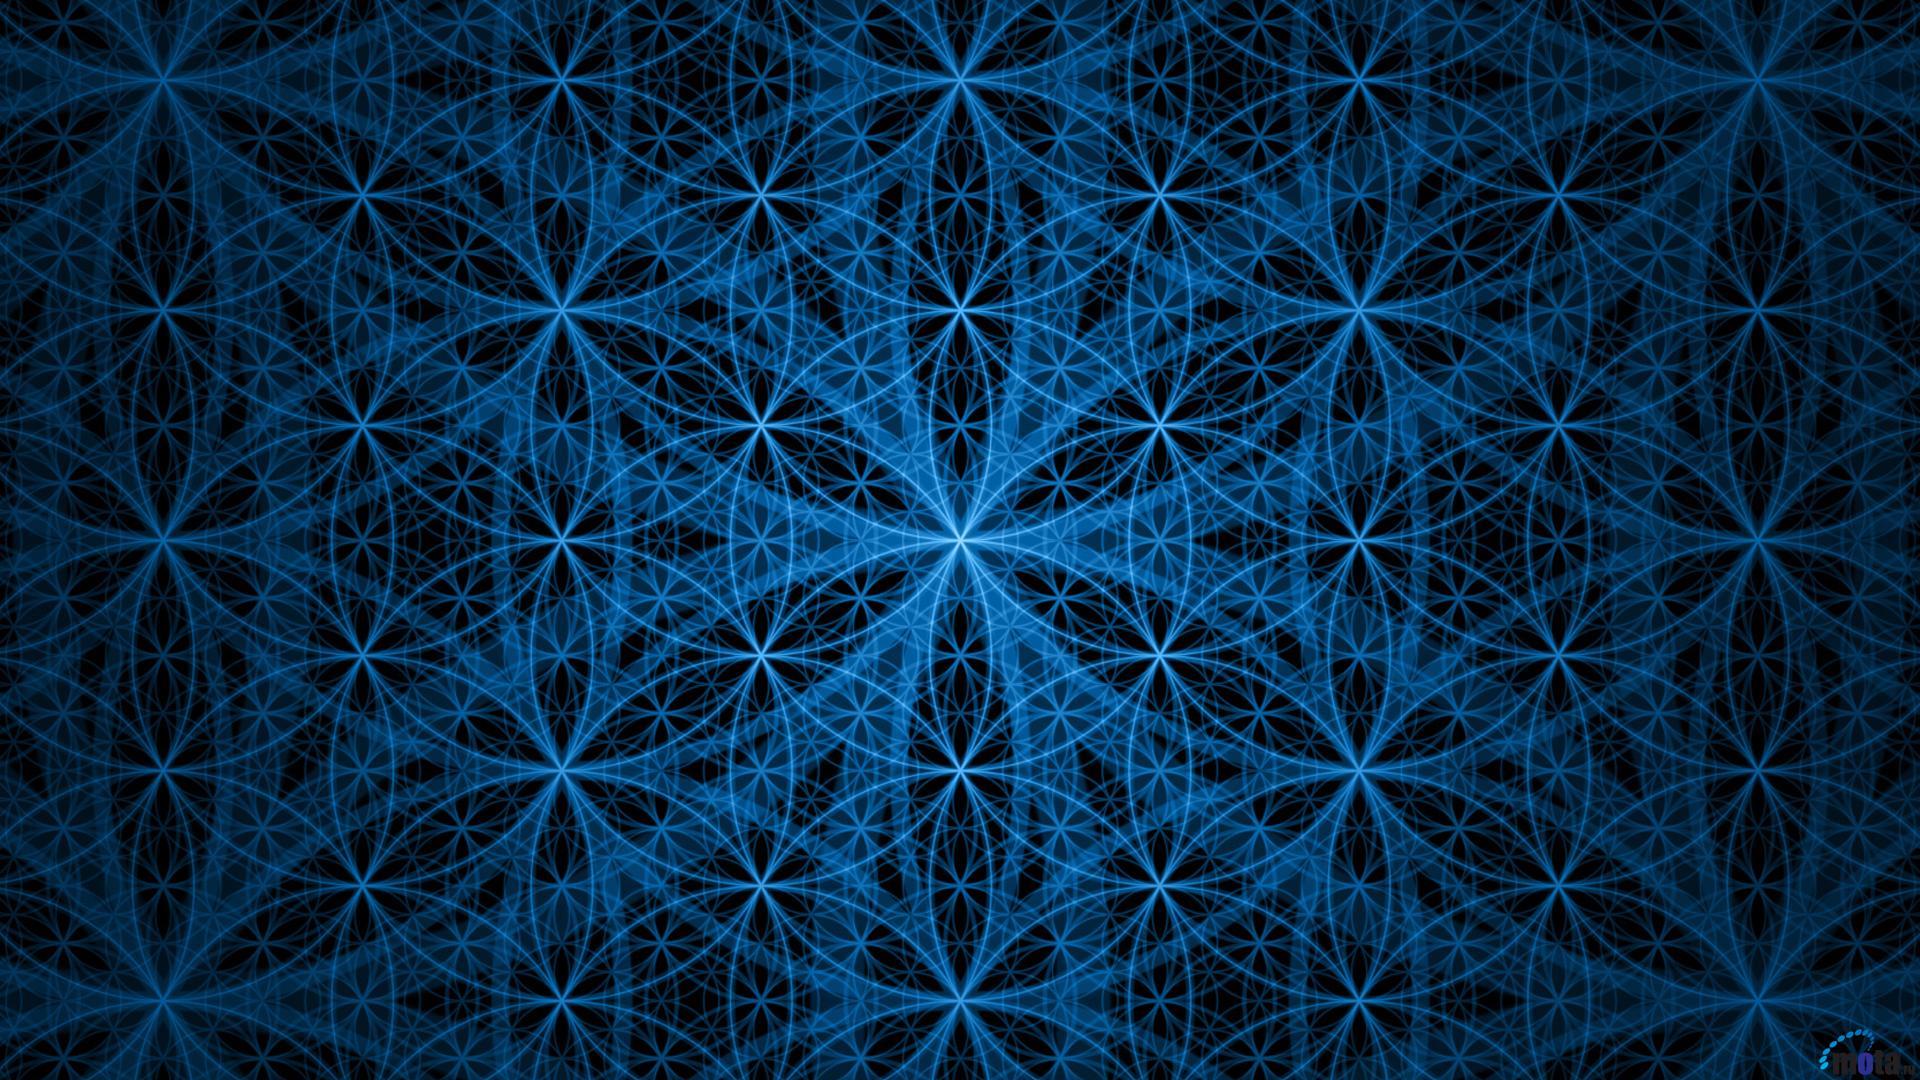 Flower Of Life Wallpapers